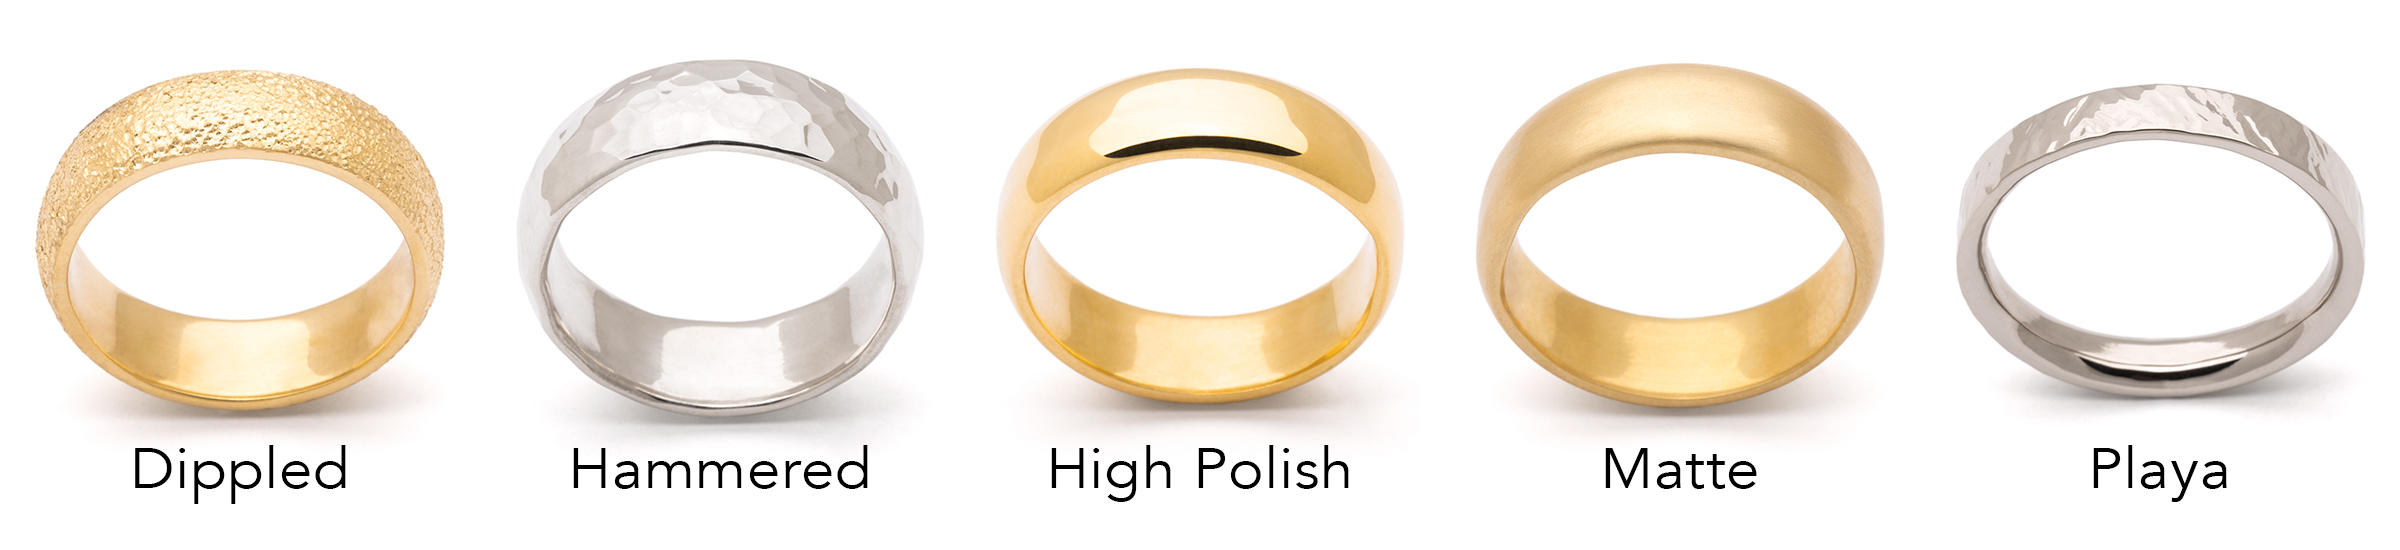 Reflective Jewelry offers five distinct finished for gold rings: high polish, matte, hand-hammered, Playa (rough), and dippled (sand)